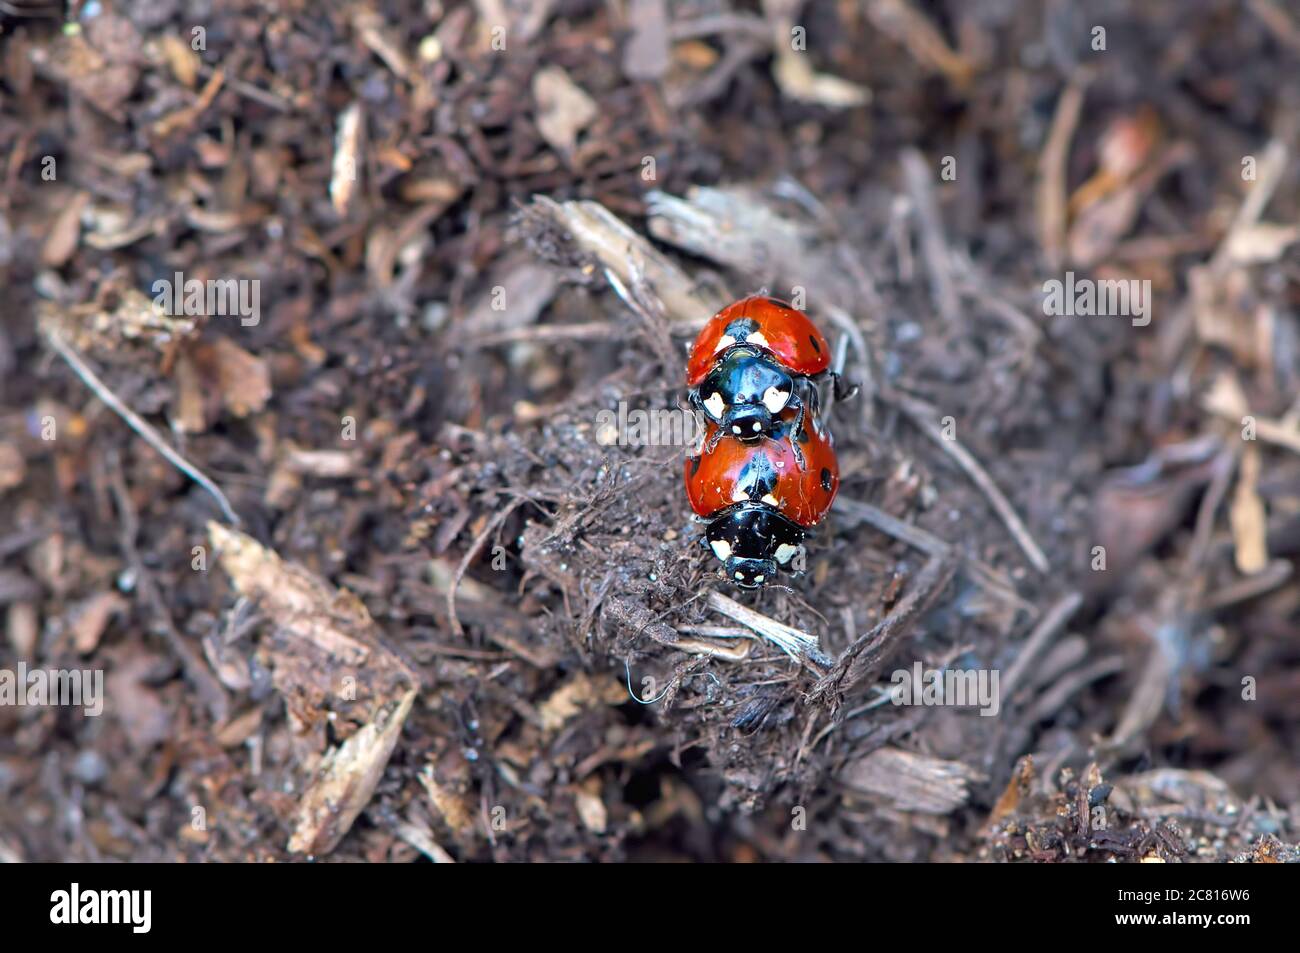 A pair of seven-spotted ladybugs or ladybirds (Coccinella septempunctata) mating on bark mulch in a garden. Stock Photo